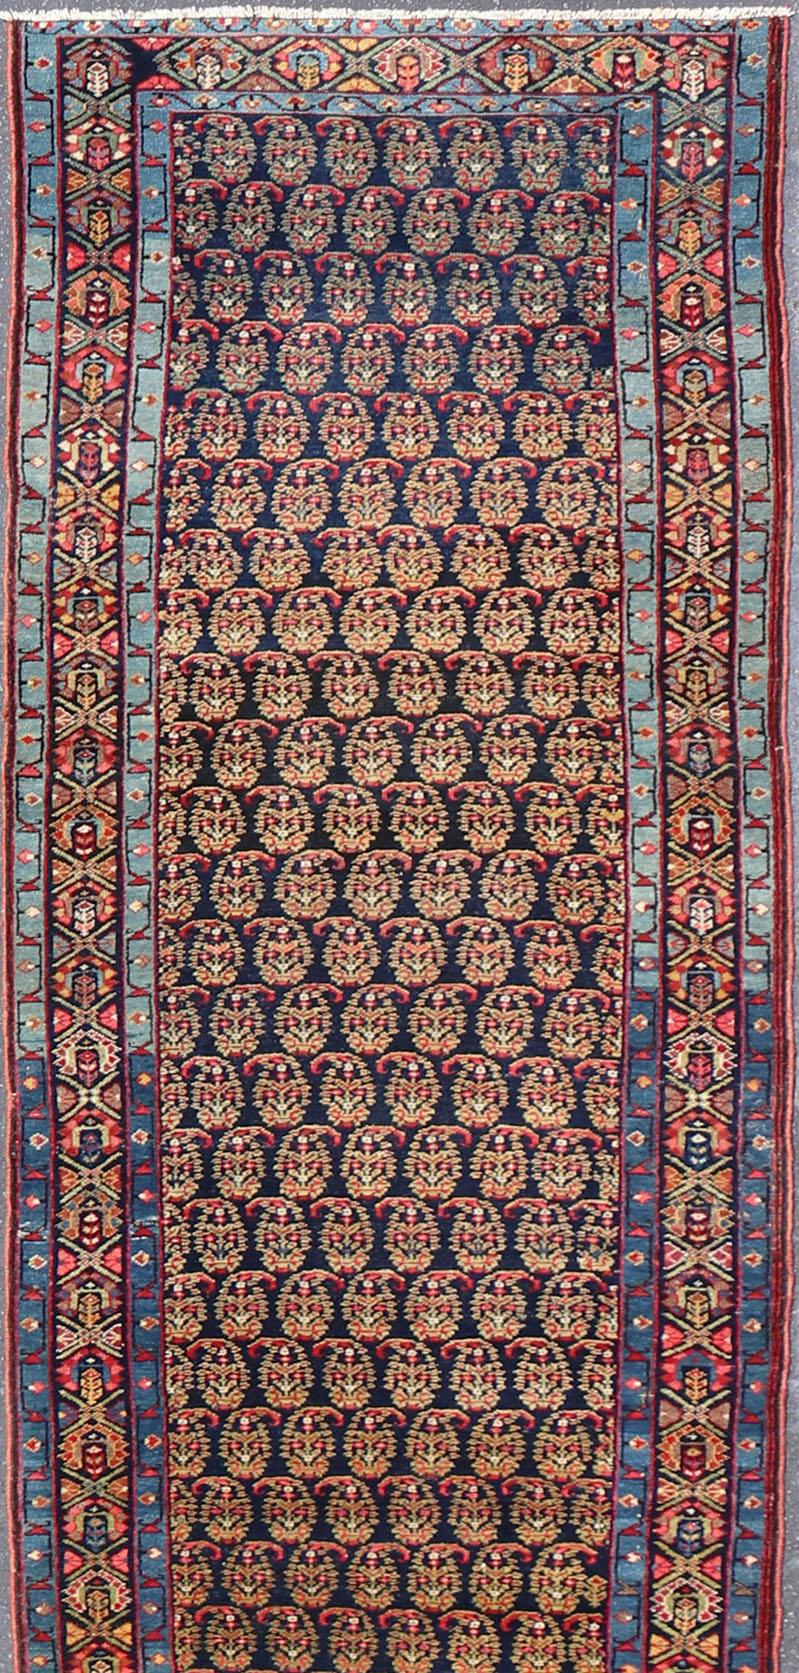 Measures 3'7 x 18'7

This antique Persian Malayer features a denim blue guard for the small banded border, decorated with modest motifs in varying shades of blue, green, yellow, and pink. The dark field homes a classic paisley field design